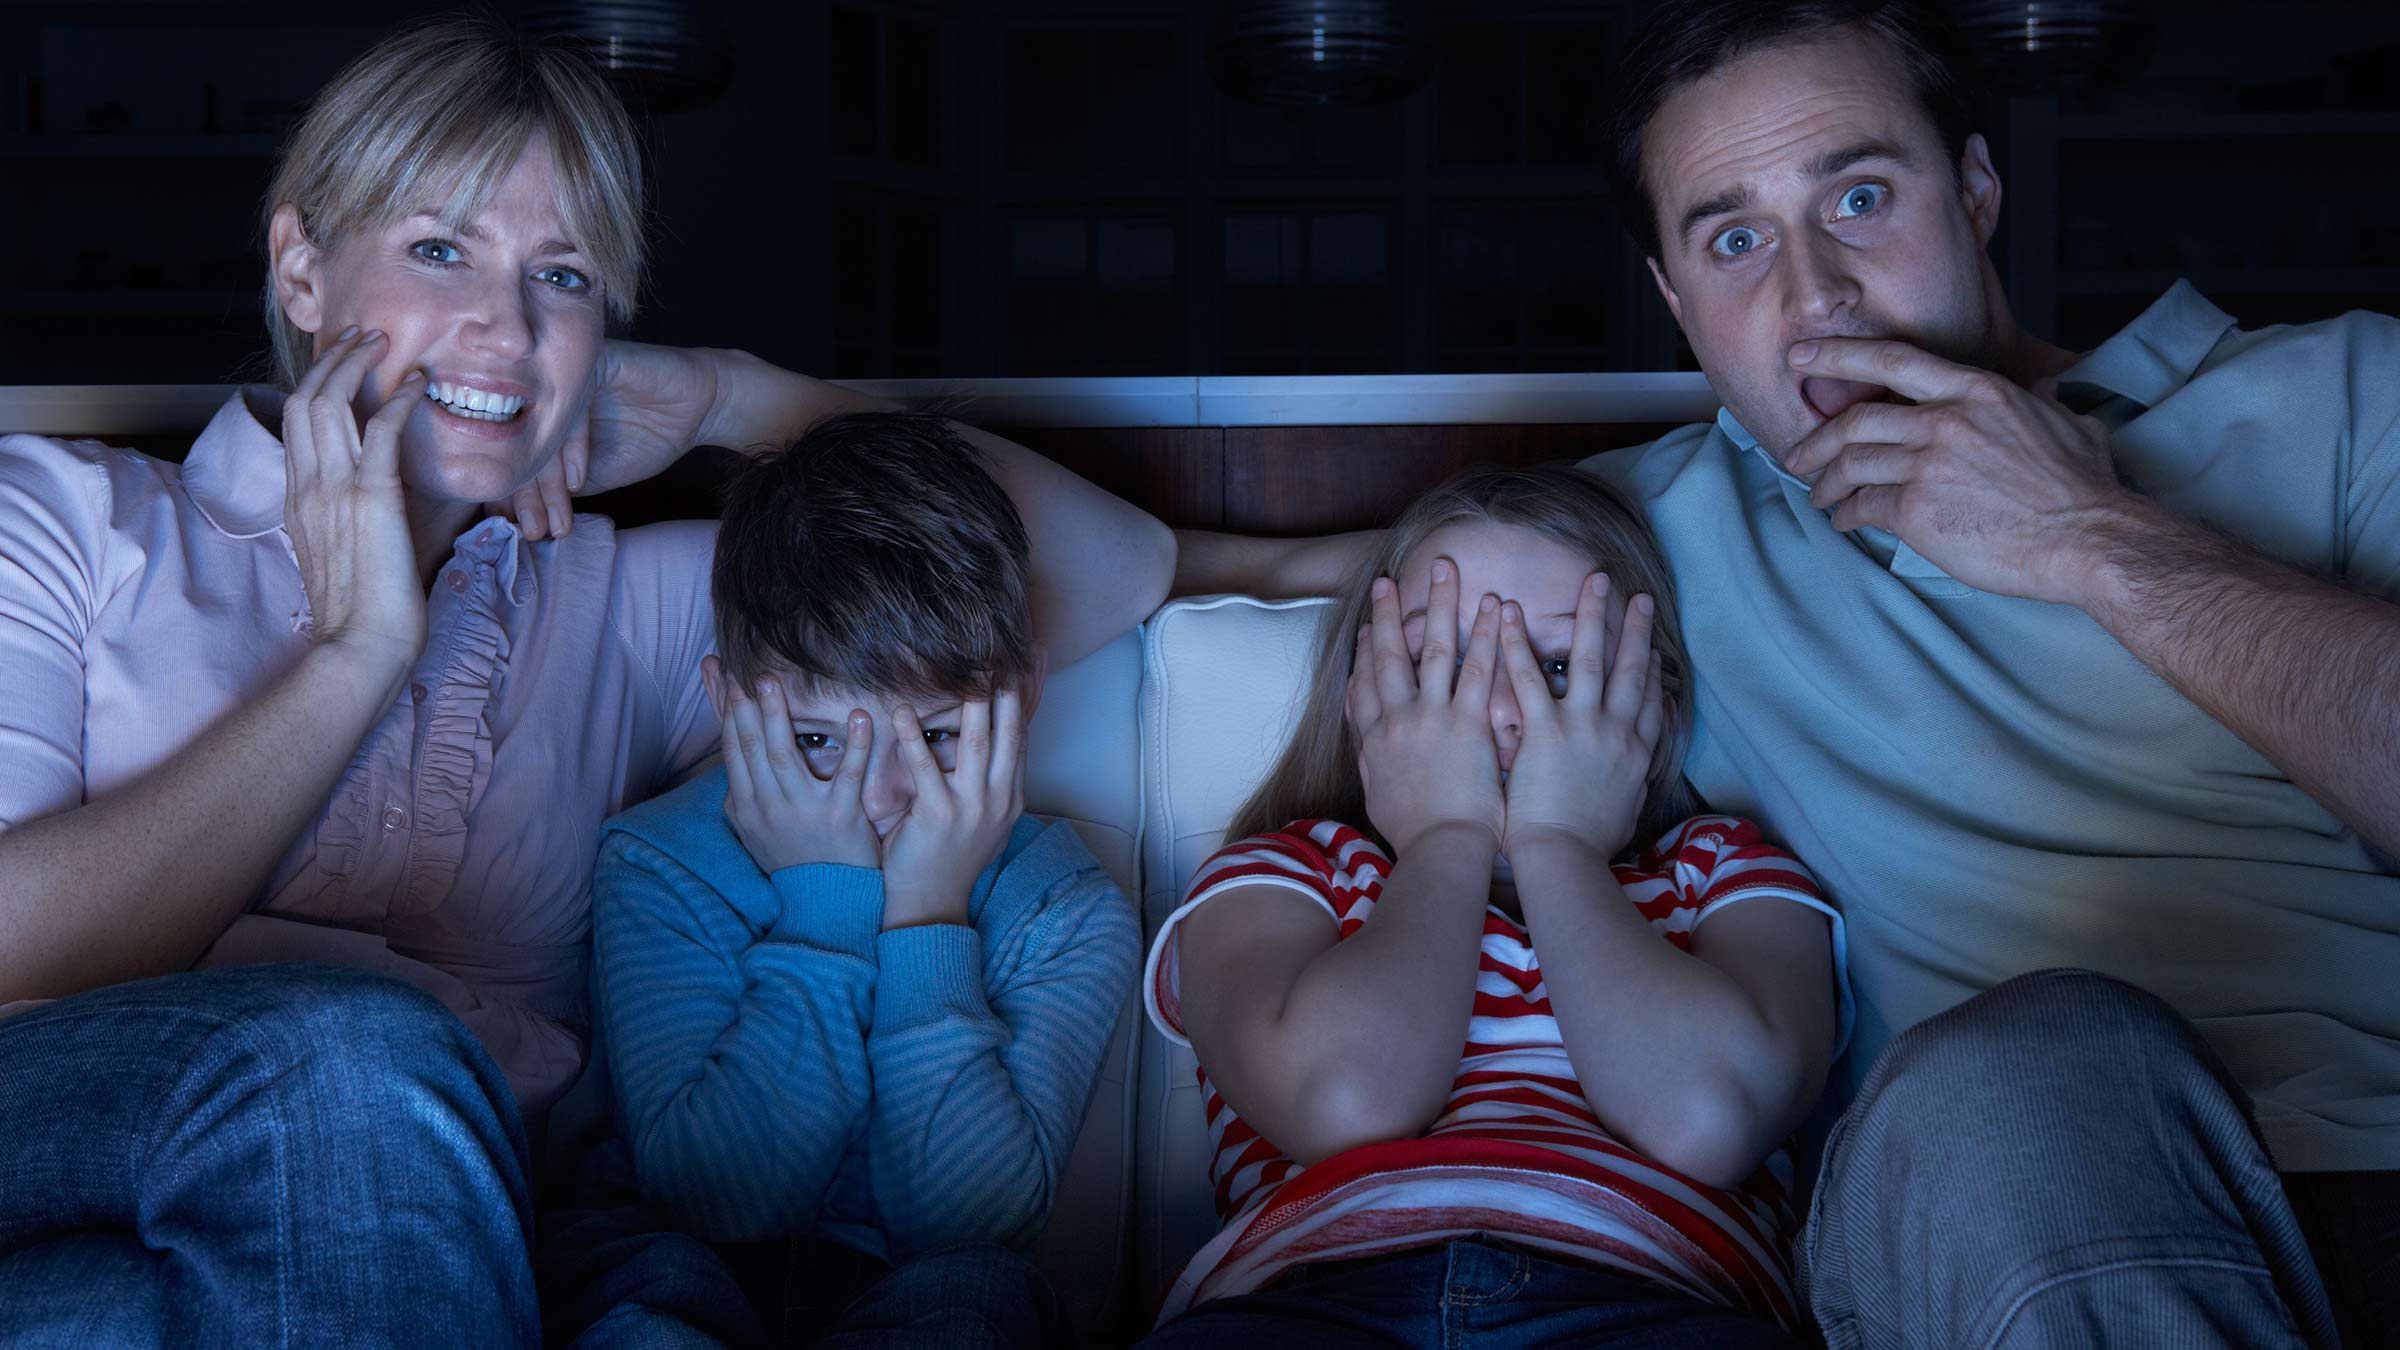 Parents and two children watch a scary movie together from the couch